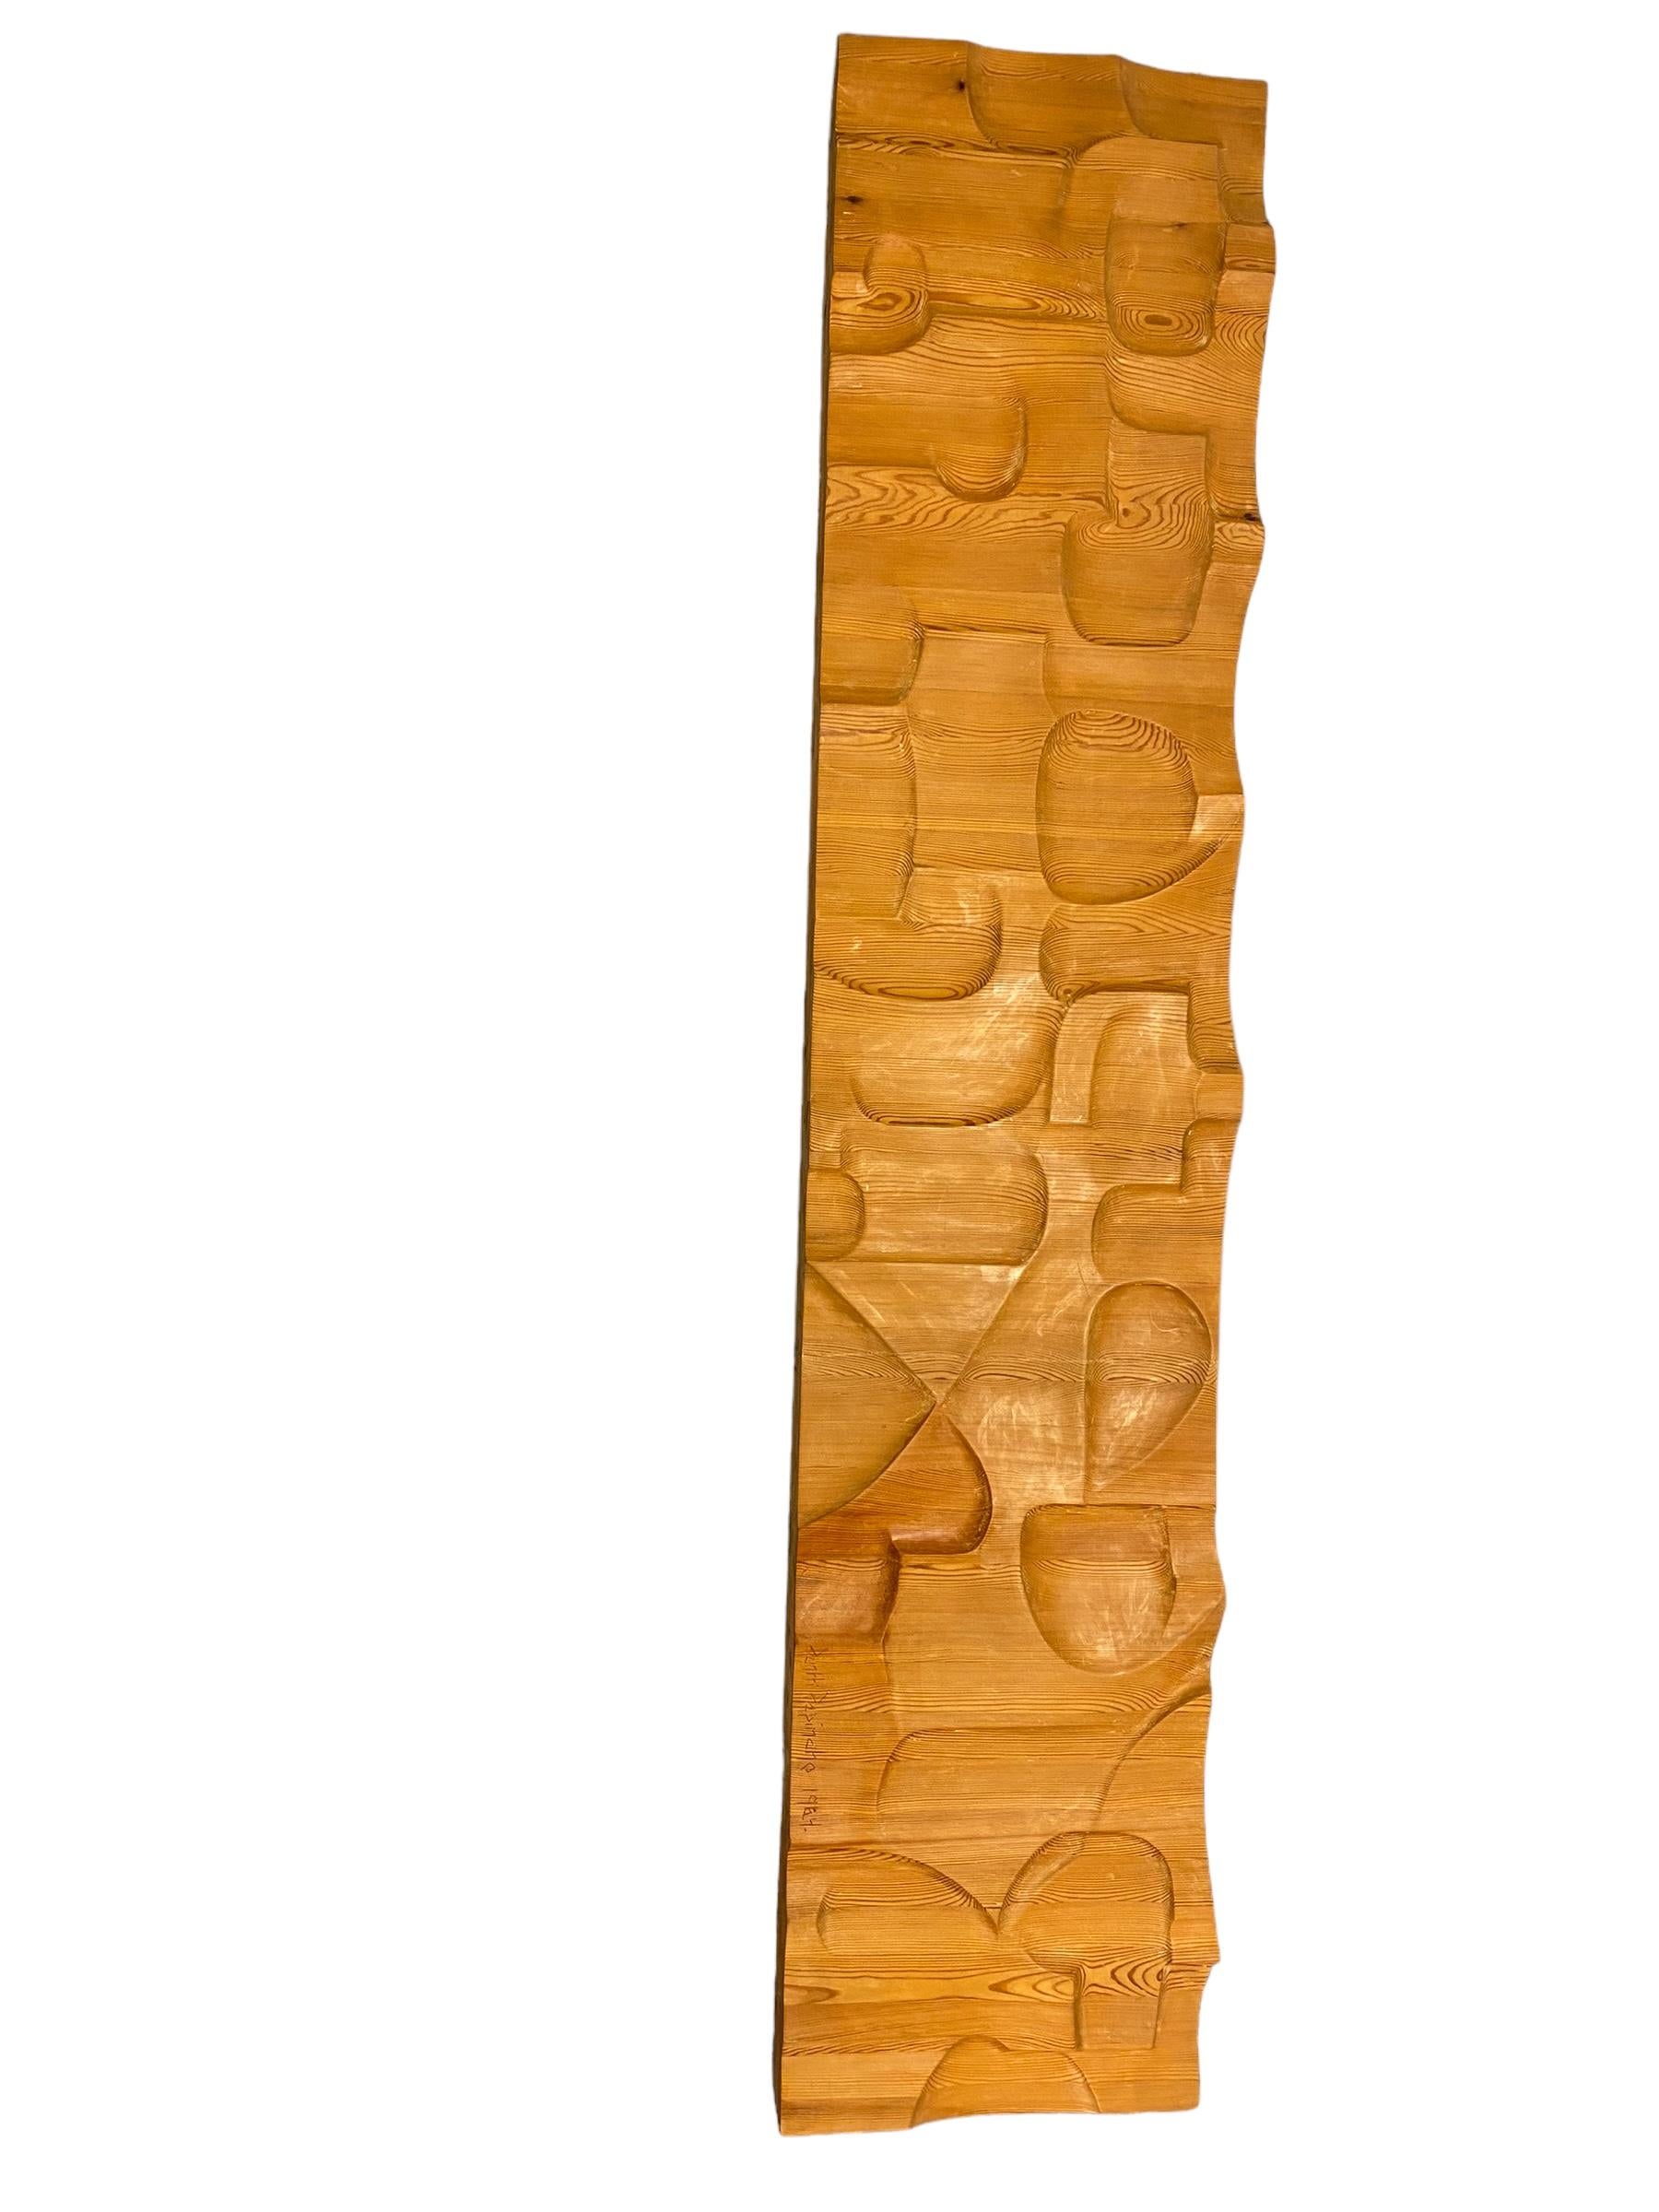 Mid-20th Century An Impressive Pentti Papinaho Wooden Sculpture, 1964 For Sale